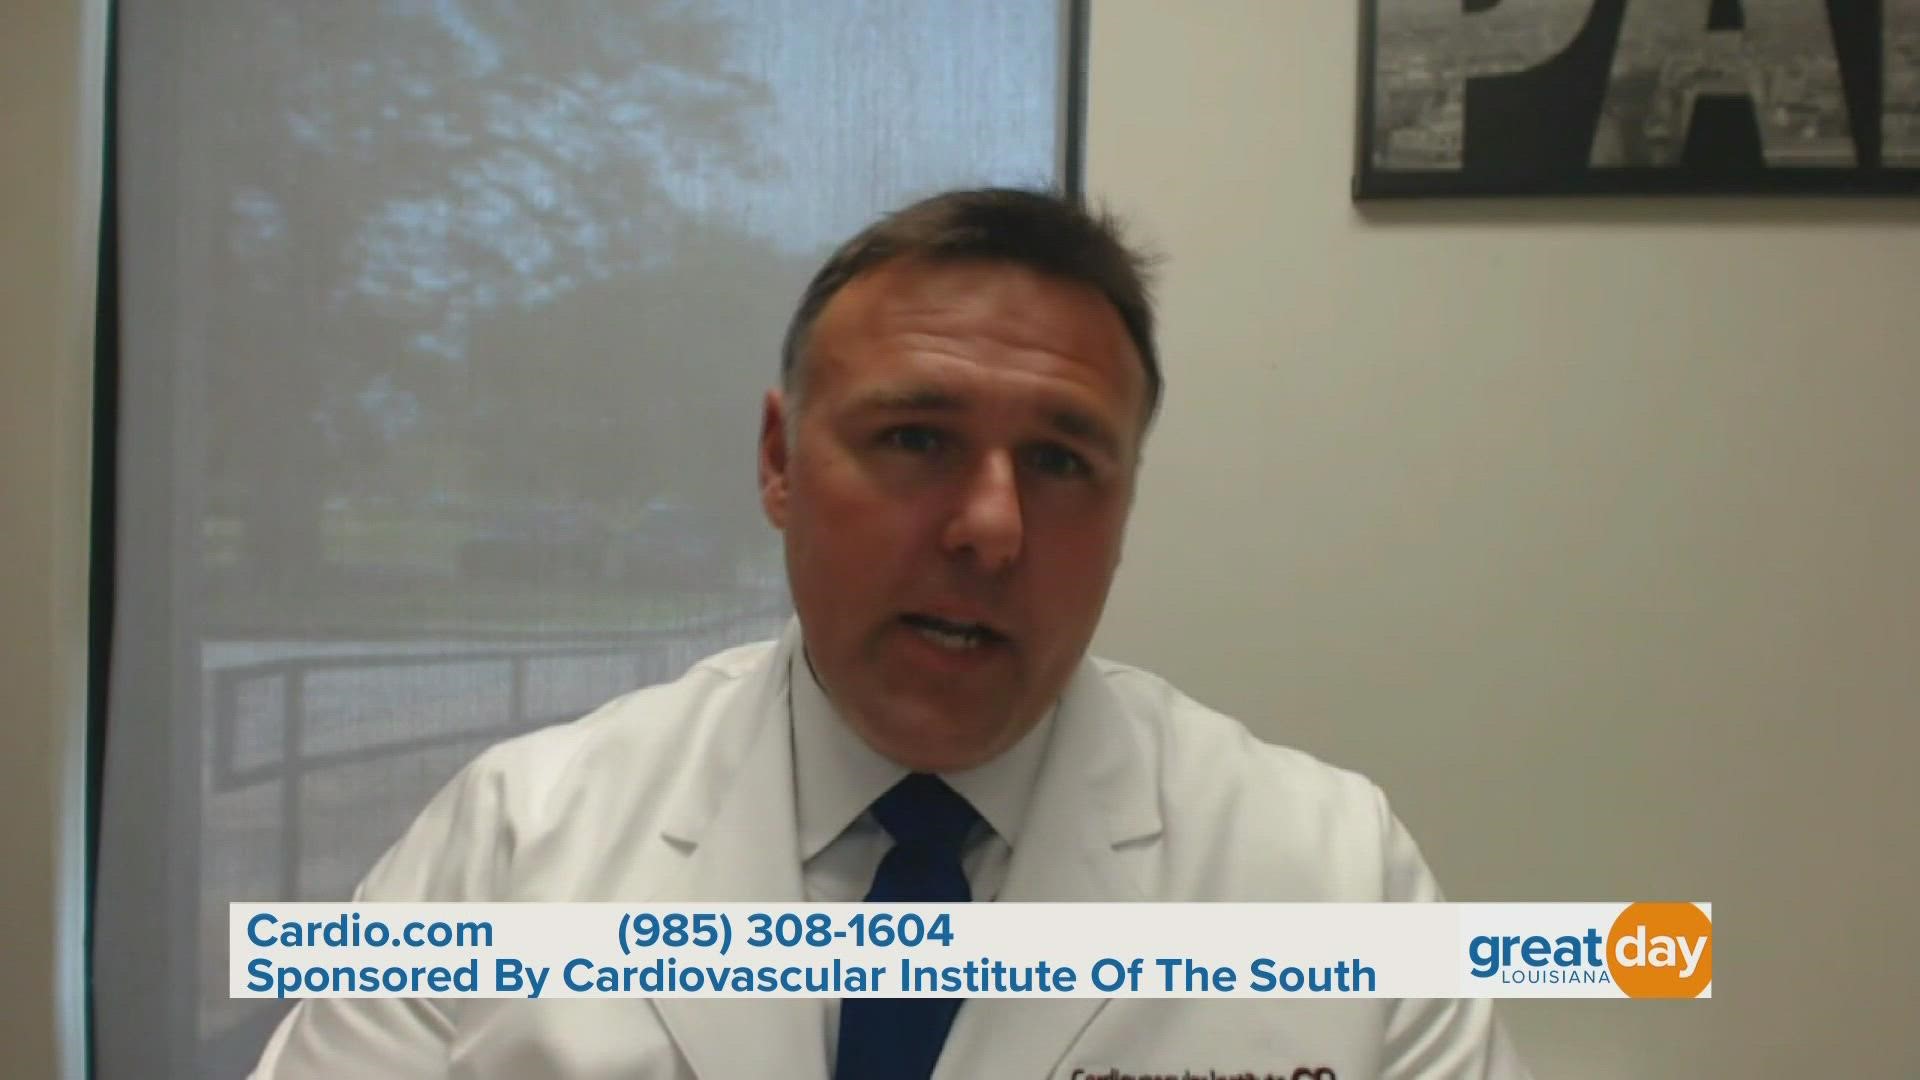 Dr. Chris Paris with Cardiovascular Institute of the South tells us more about Peripheral Artery Disease and what you can do to prevent it.